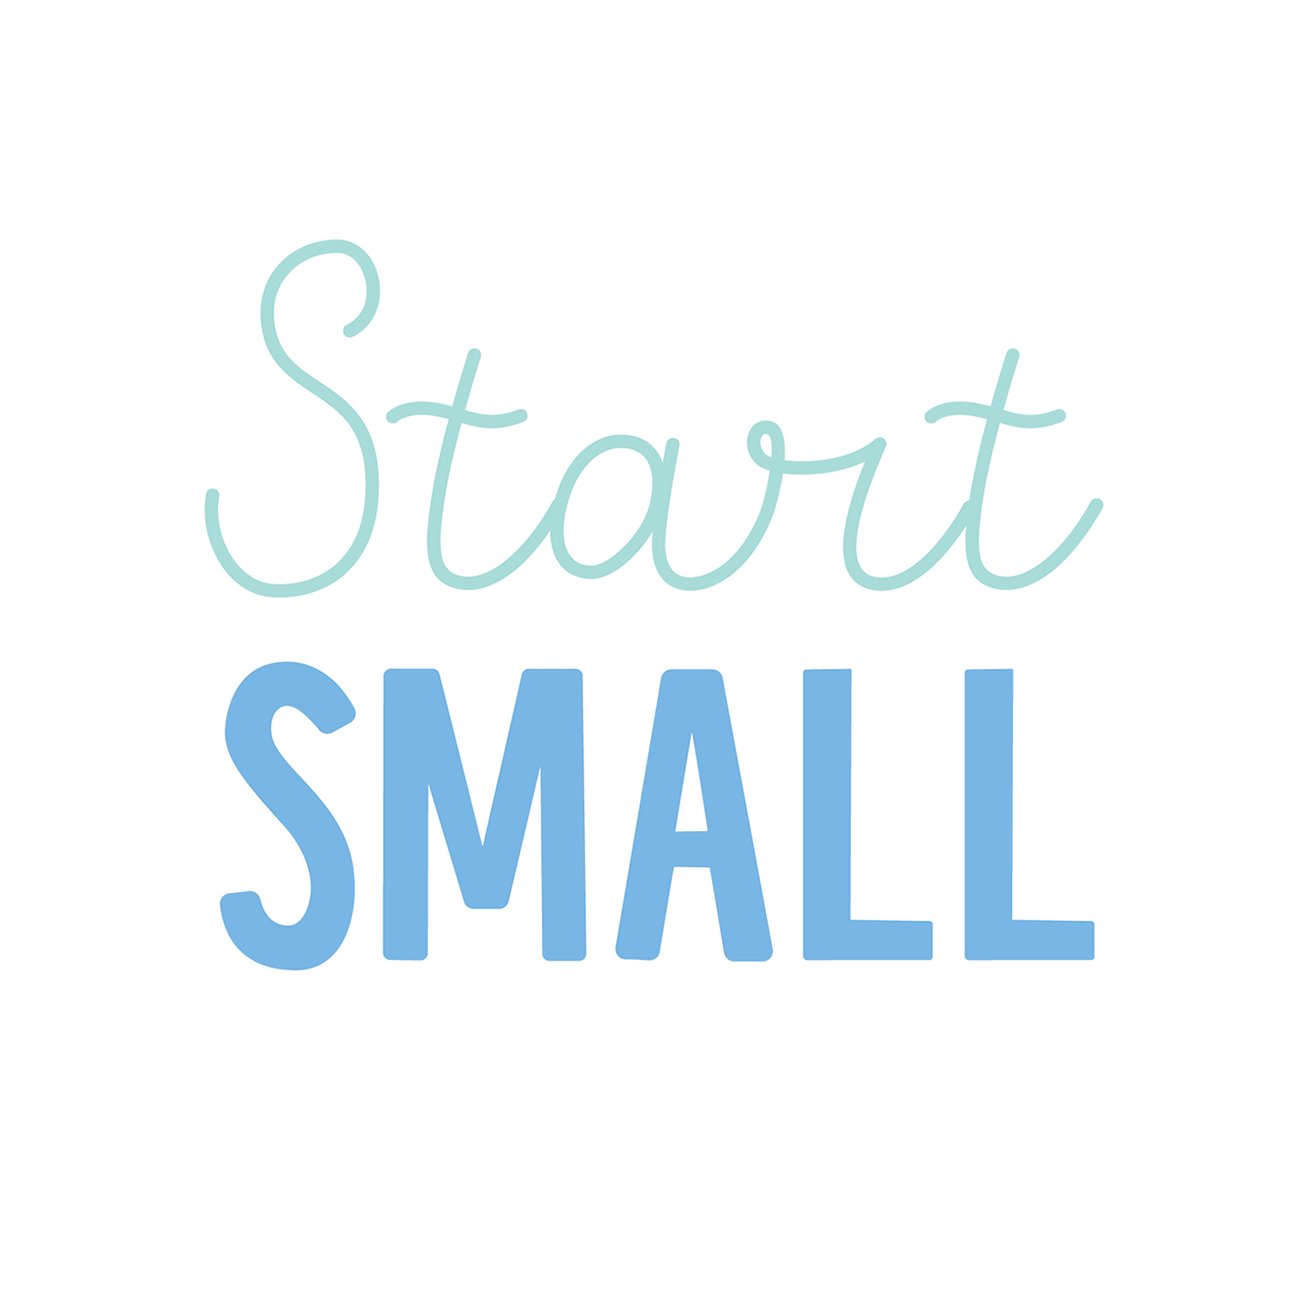 Start Small, Part 6: Small Gift